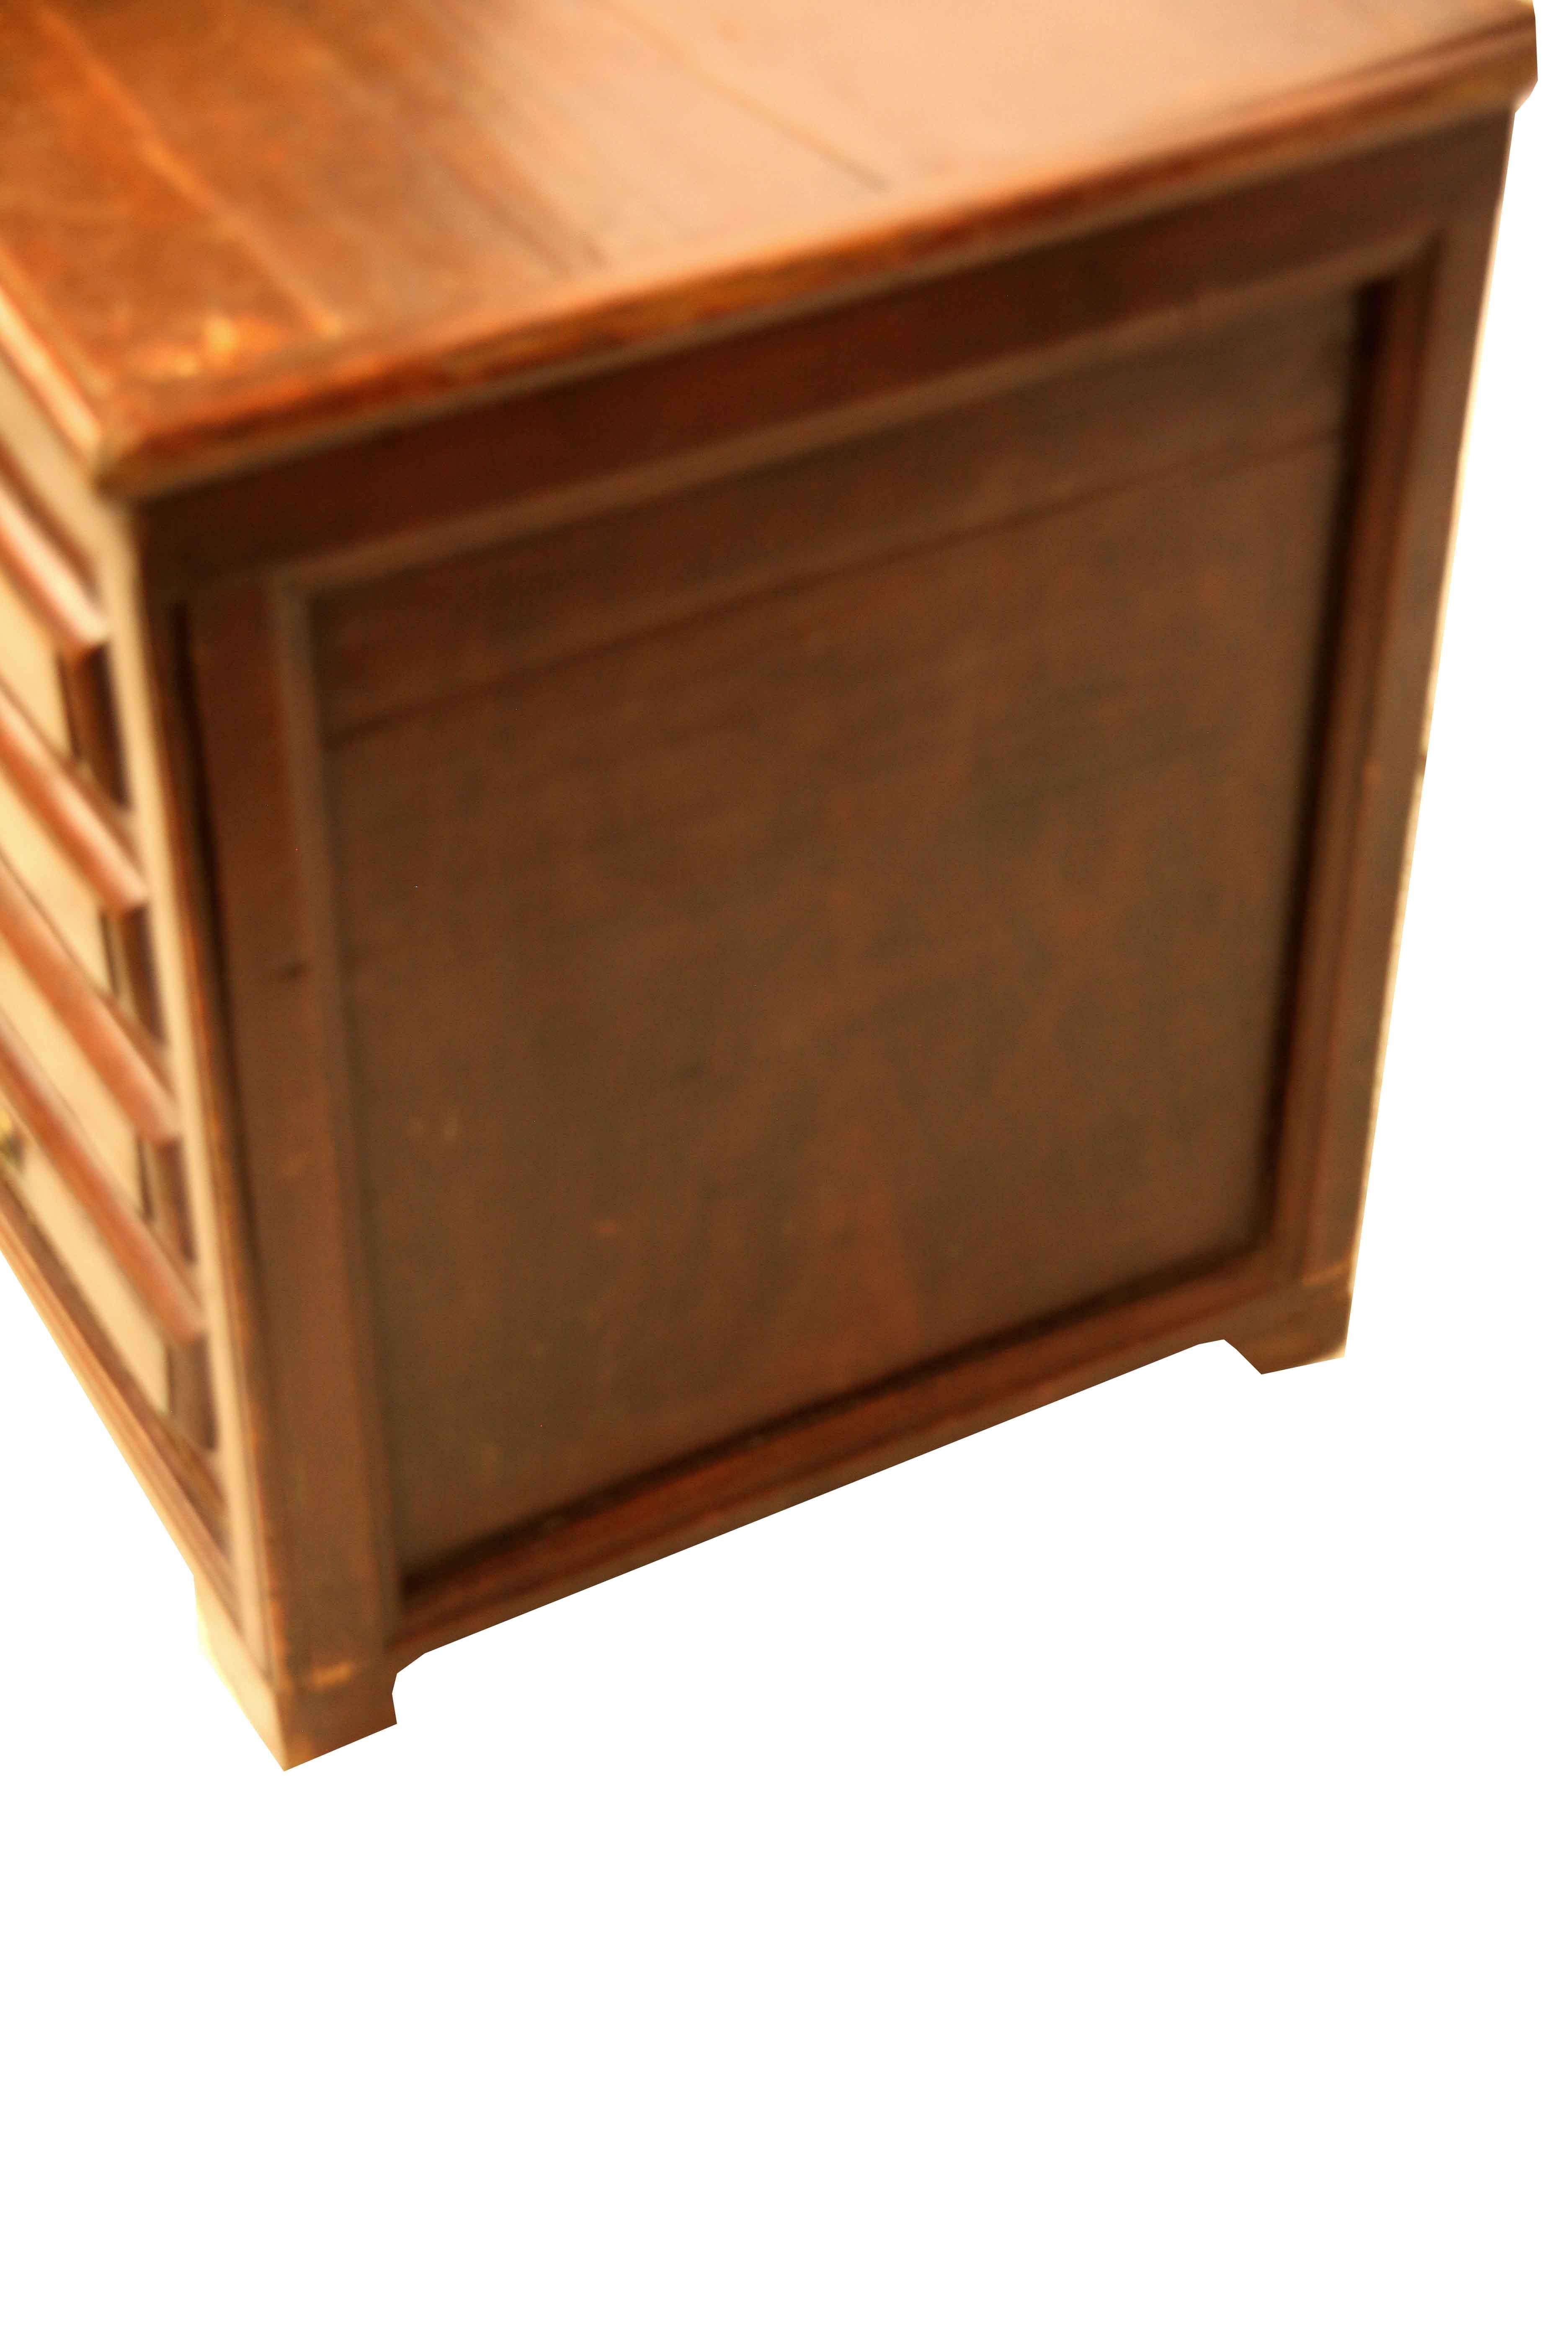 Faux Bois English Painted Blanket Chest For Sale